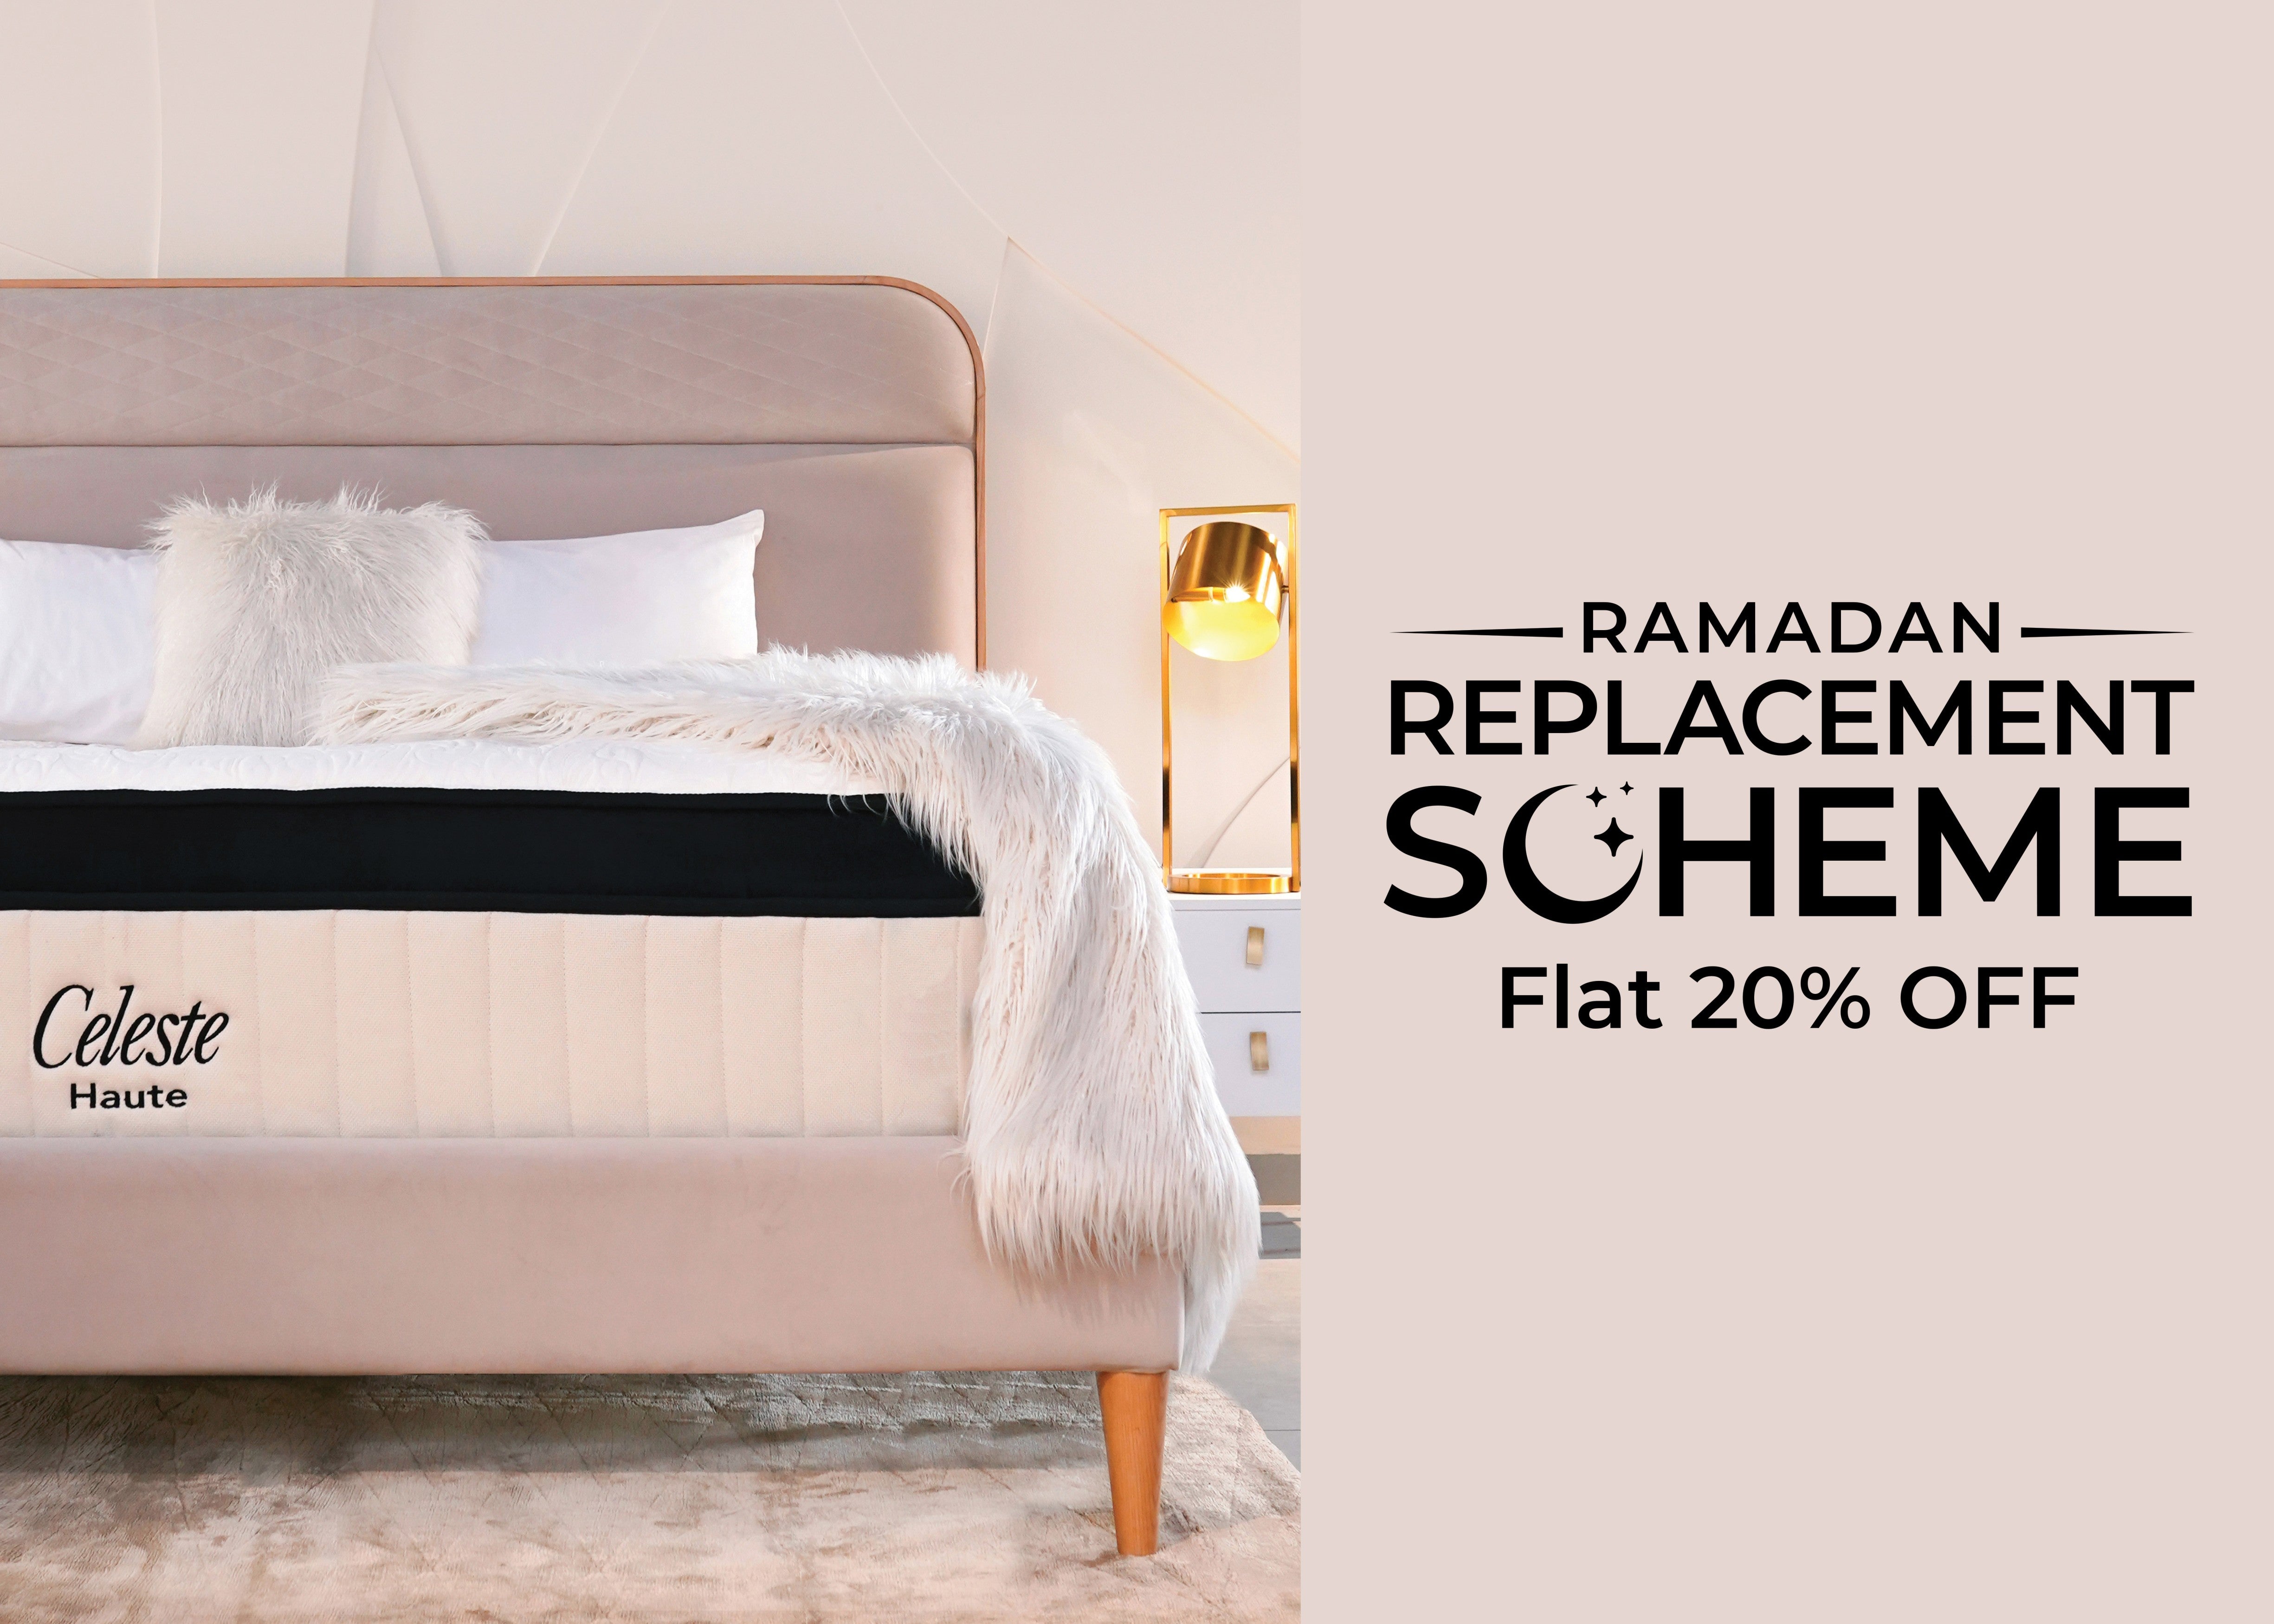 Revitalize your sleep experience with Our Ramadan Replacement Scheme